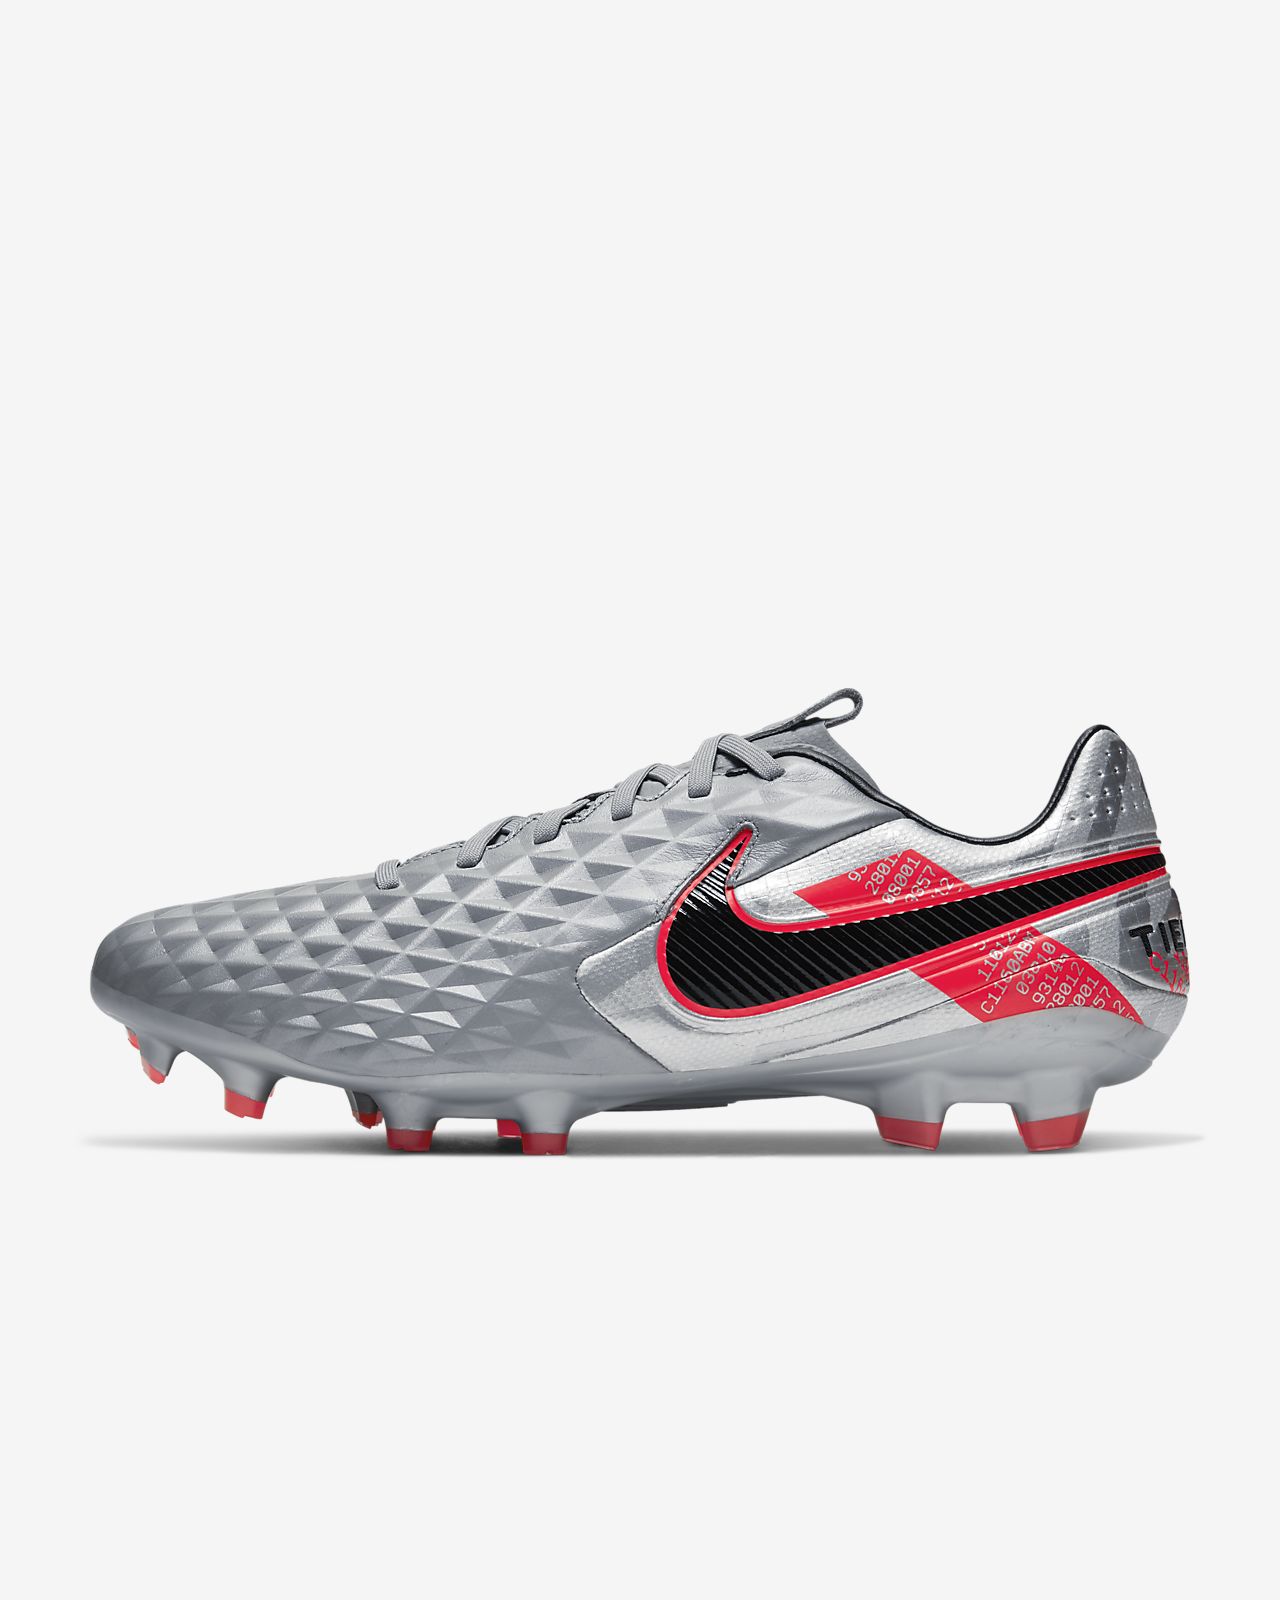 Nike Tiempo Legend 8 Pro FG Football boots for firm